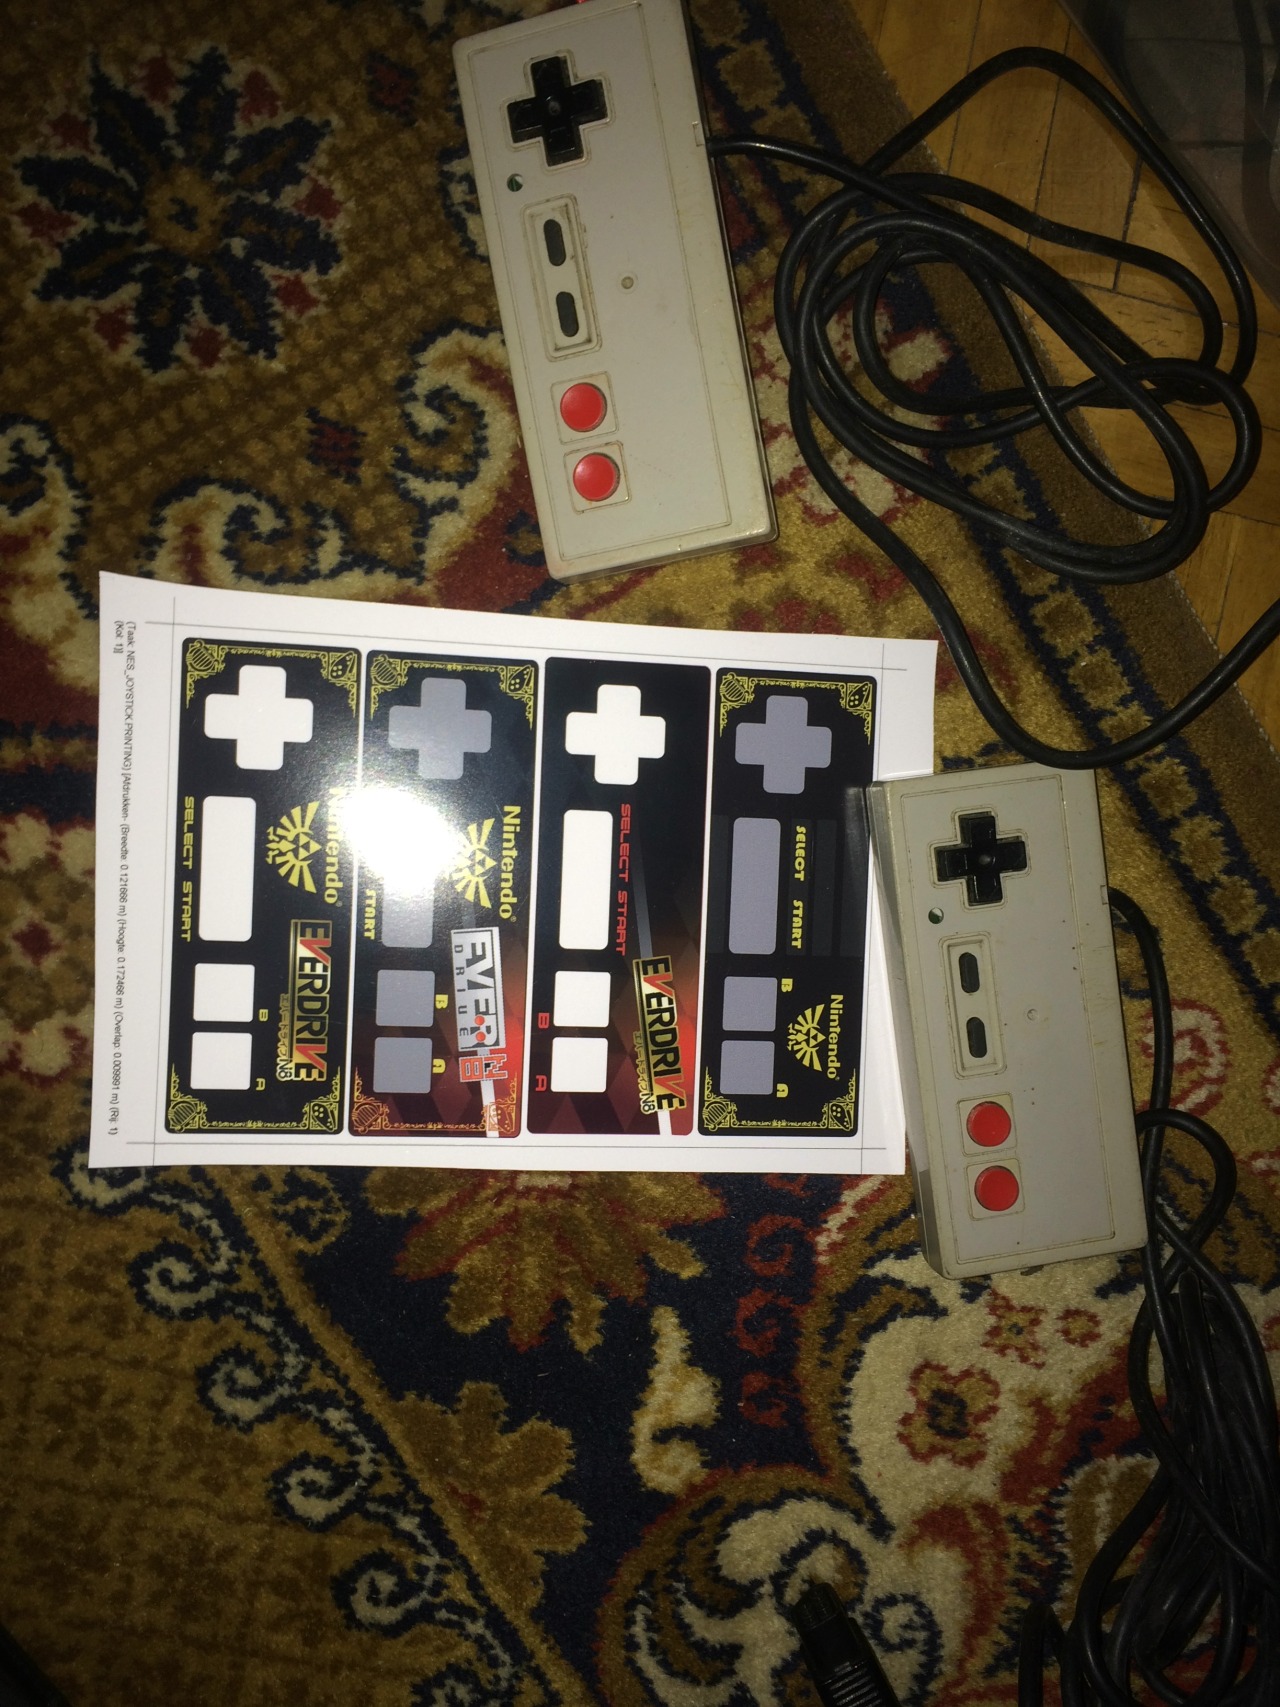 Buy Cheap Nes controllers without stickers, clean them out, and then stick on the new pimp’d stickers :-D